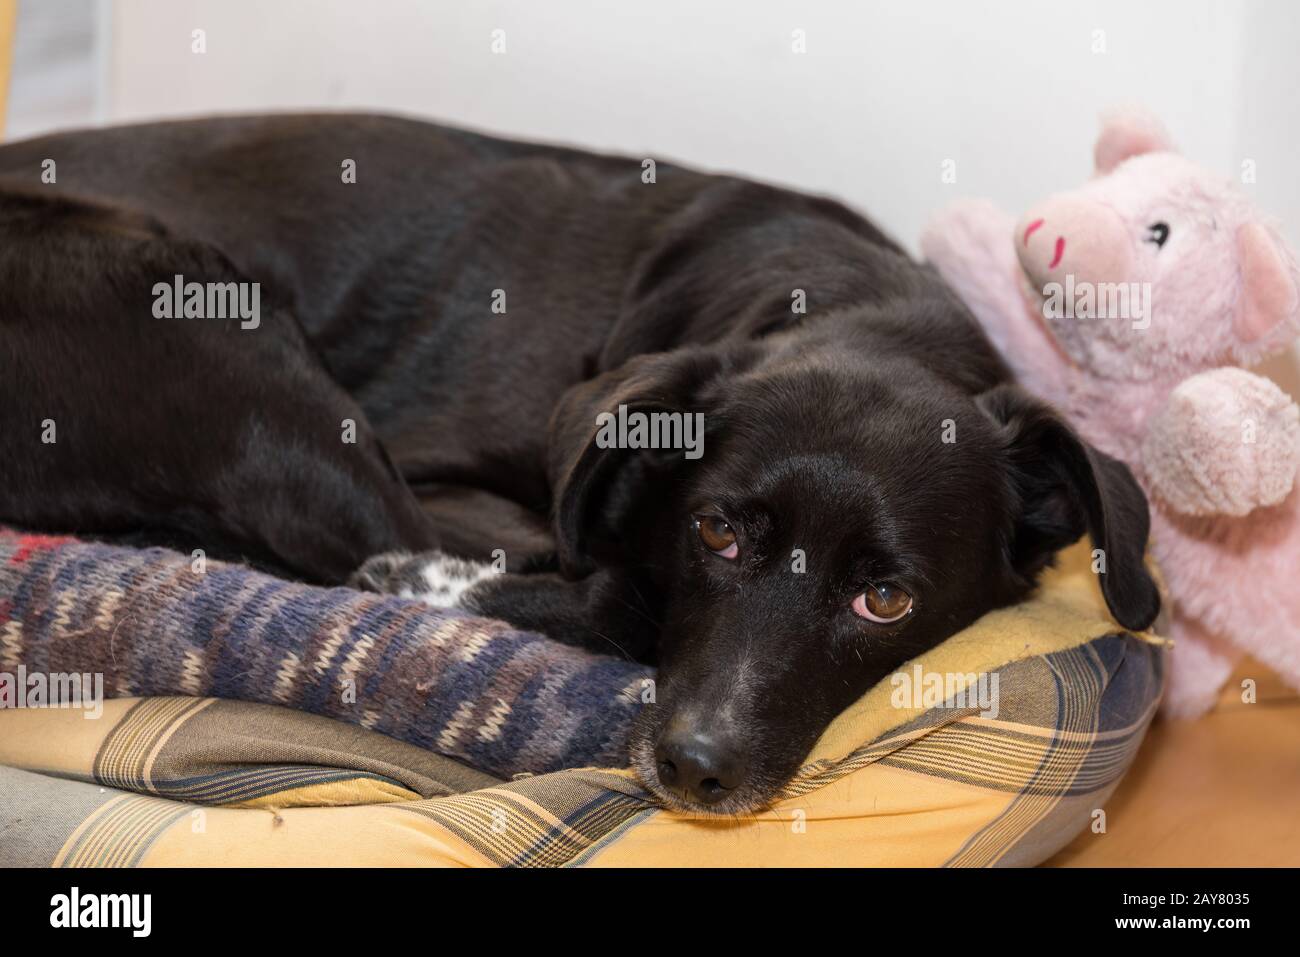 Black dog in his bed with lucky pig as cuddly toy Stock Photo